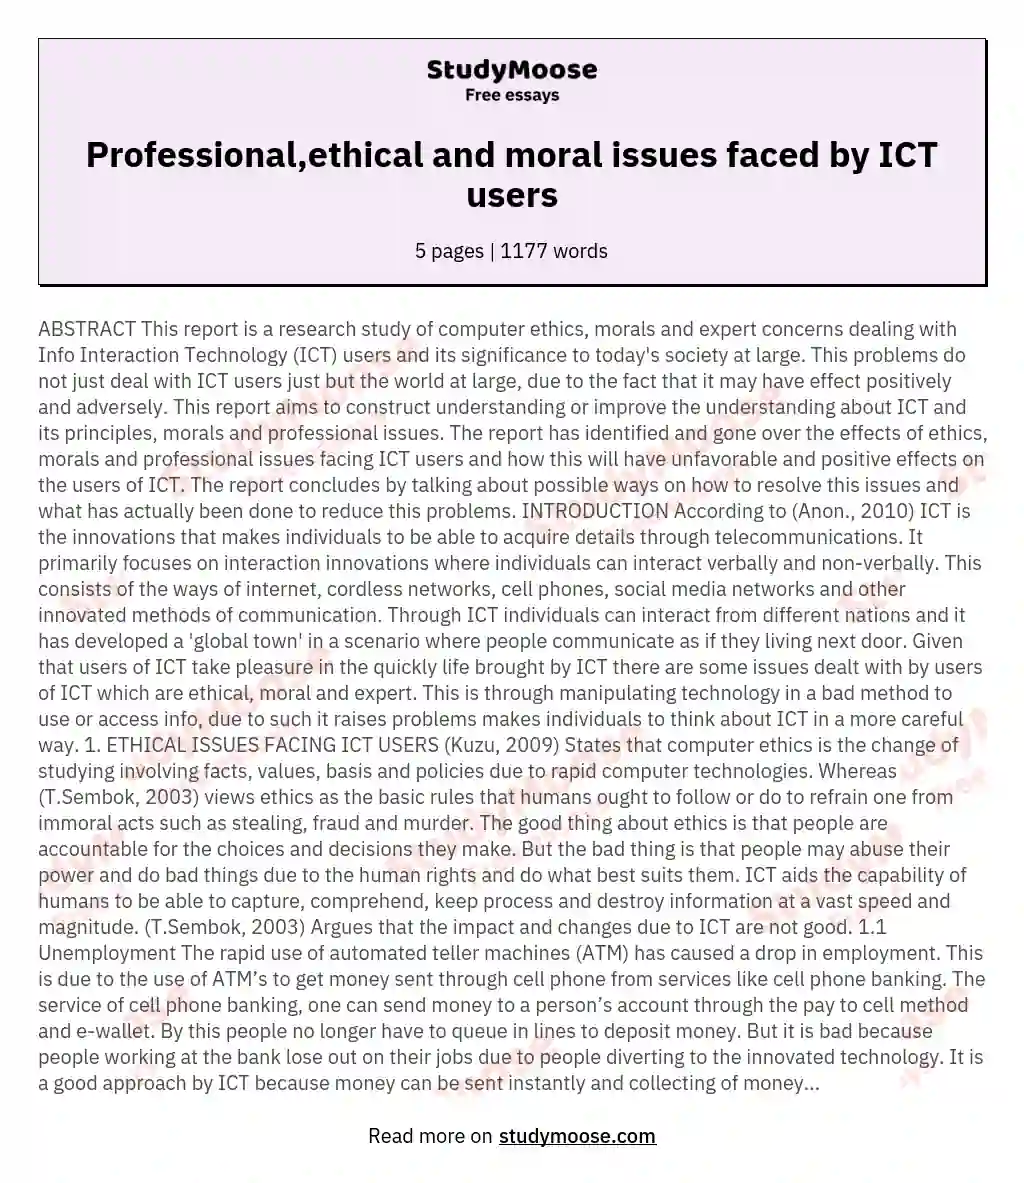 Professional,ethical and moral issues faced by ICT users